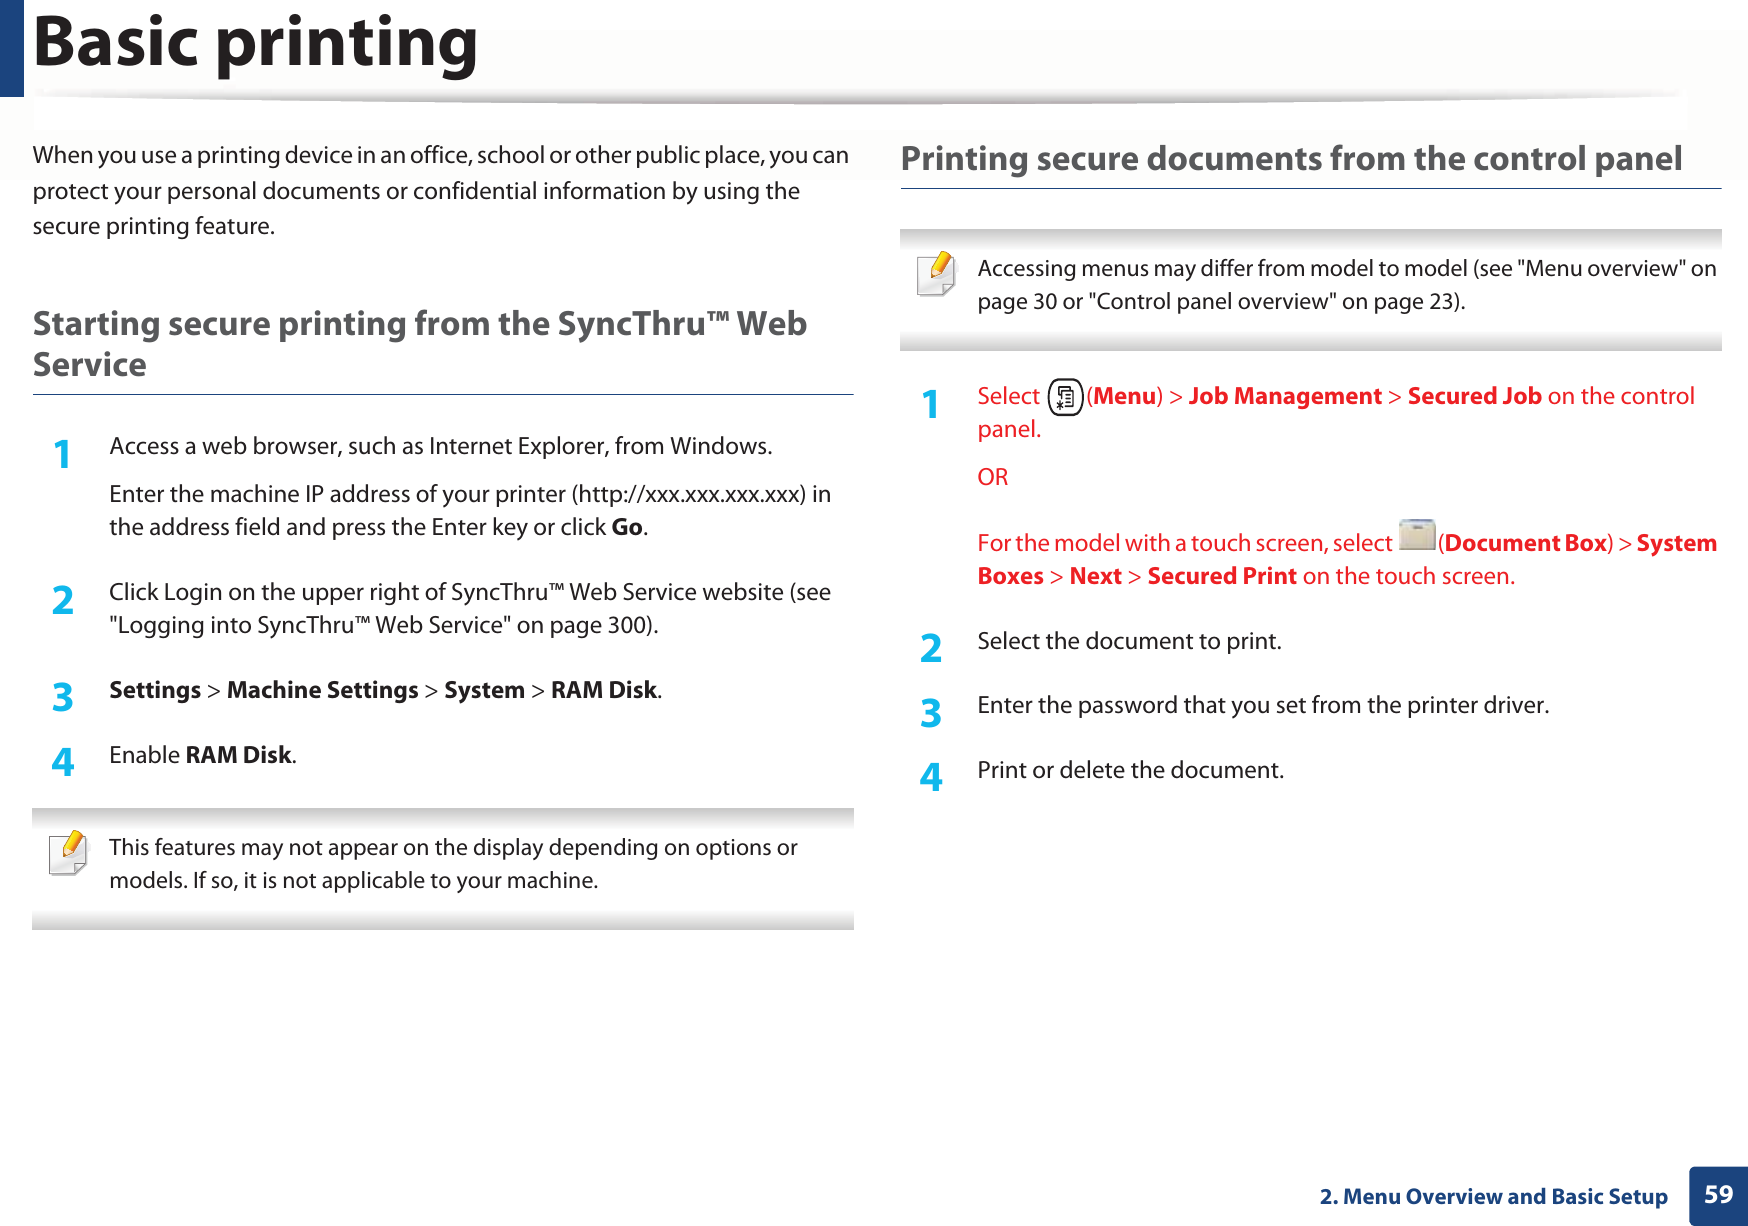 Basic printing592. Menu Overview and Basic SetupWhen you use a printing device in an office, school or other public place, you can protect your personal documents or confidential information by using the secure printing feature.Starting secure printing from the SyncThru™ Web Service1Access a web browser, such as Internet Explorer, from Windows.Enter the machine IP address of your printer (http://xxx.xxx.xxx.xxx) in the address field and press the Enter key or click Go.2  Click Login on the upper right of SyncThru™ Web Service website (see &quot;Logging into SyncThru™ Web Service&quot; on page 300).3  Settings &gt; Machine Settings &gt; System &gt; RAM Disk.4  Enable RAM Disk.  This features may not appear on the display depending on options or models. If so, it is not applicable to your machine. Printing secure documents from the control panel Accessing menus may differ from model to model (see &quot;Menu overview&quot; on page 30 or &quot;Control panel overview&quot; on page 23). 1Select (Menu) &gt; Job Management &gt; Secured Job on the control panel.ORFor the model with a touch screen, select  (Document Box) &gt; System Boxes &gt; Next &gt; Secured Print on the touch screen.2  Select the document to print.3  Enter the password that you set from the printer driver.4  Print or delete the document.